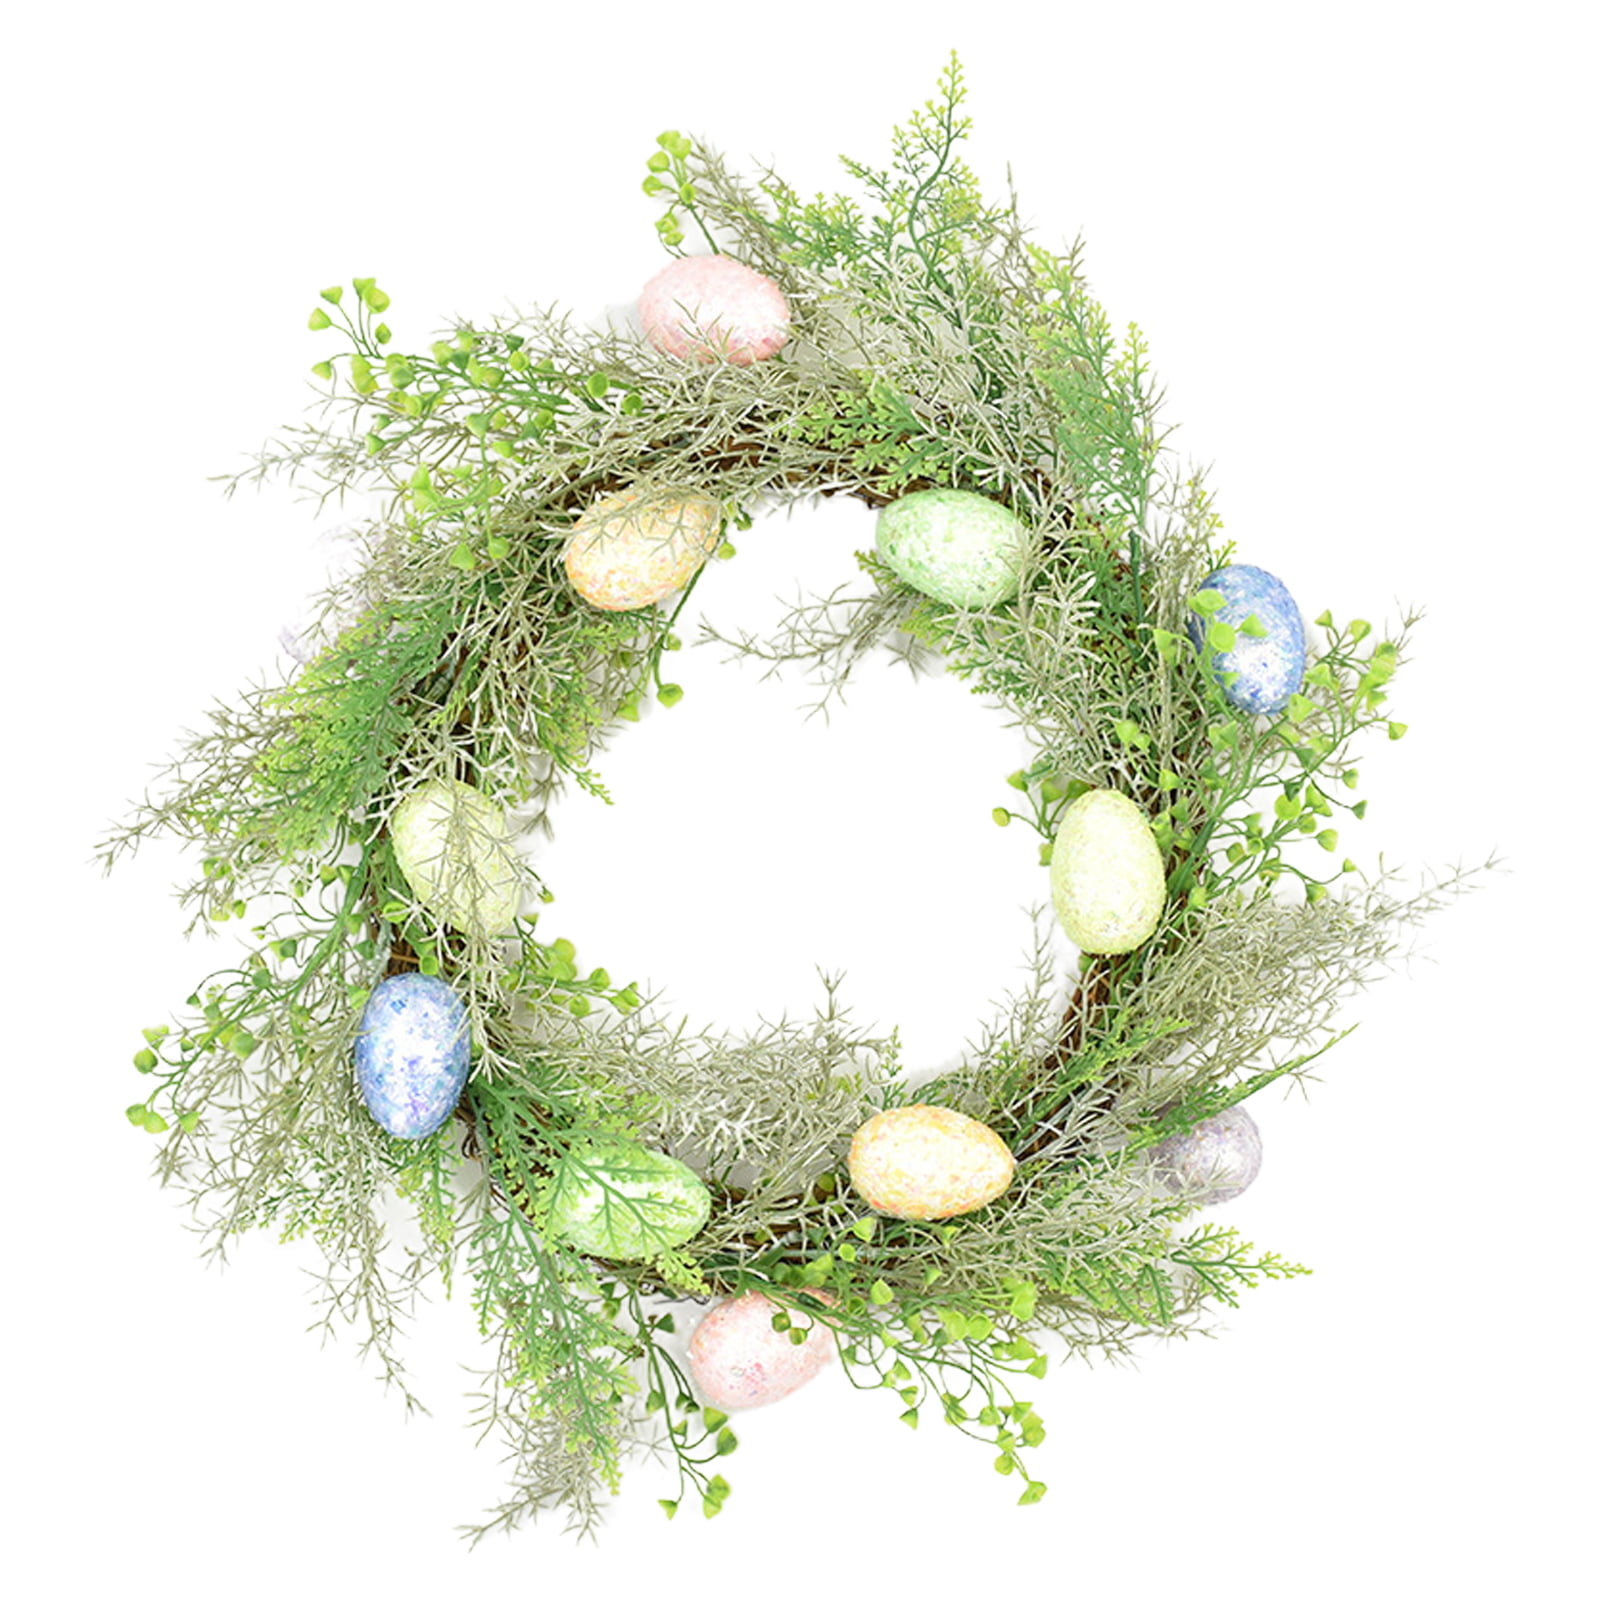 Details about   Rattan Ring Christmas White Wreath DIY Wedding Decoration High quality New 